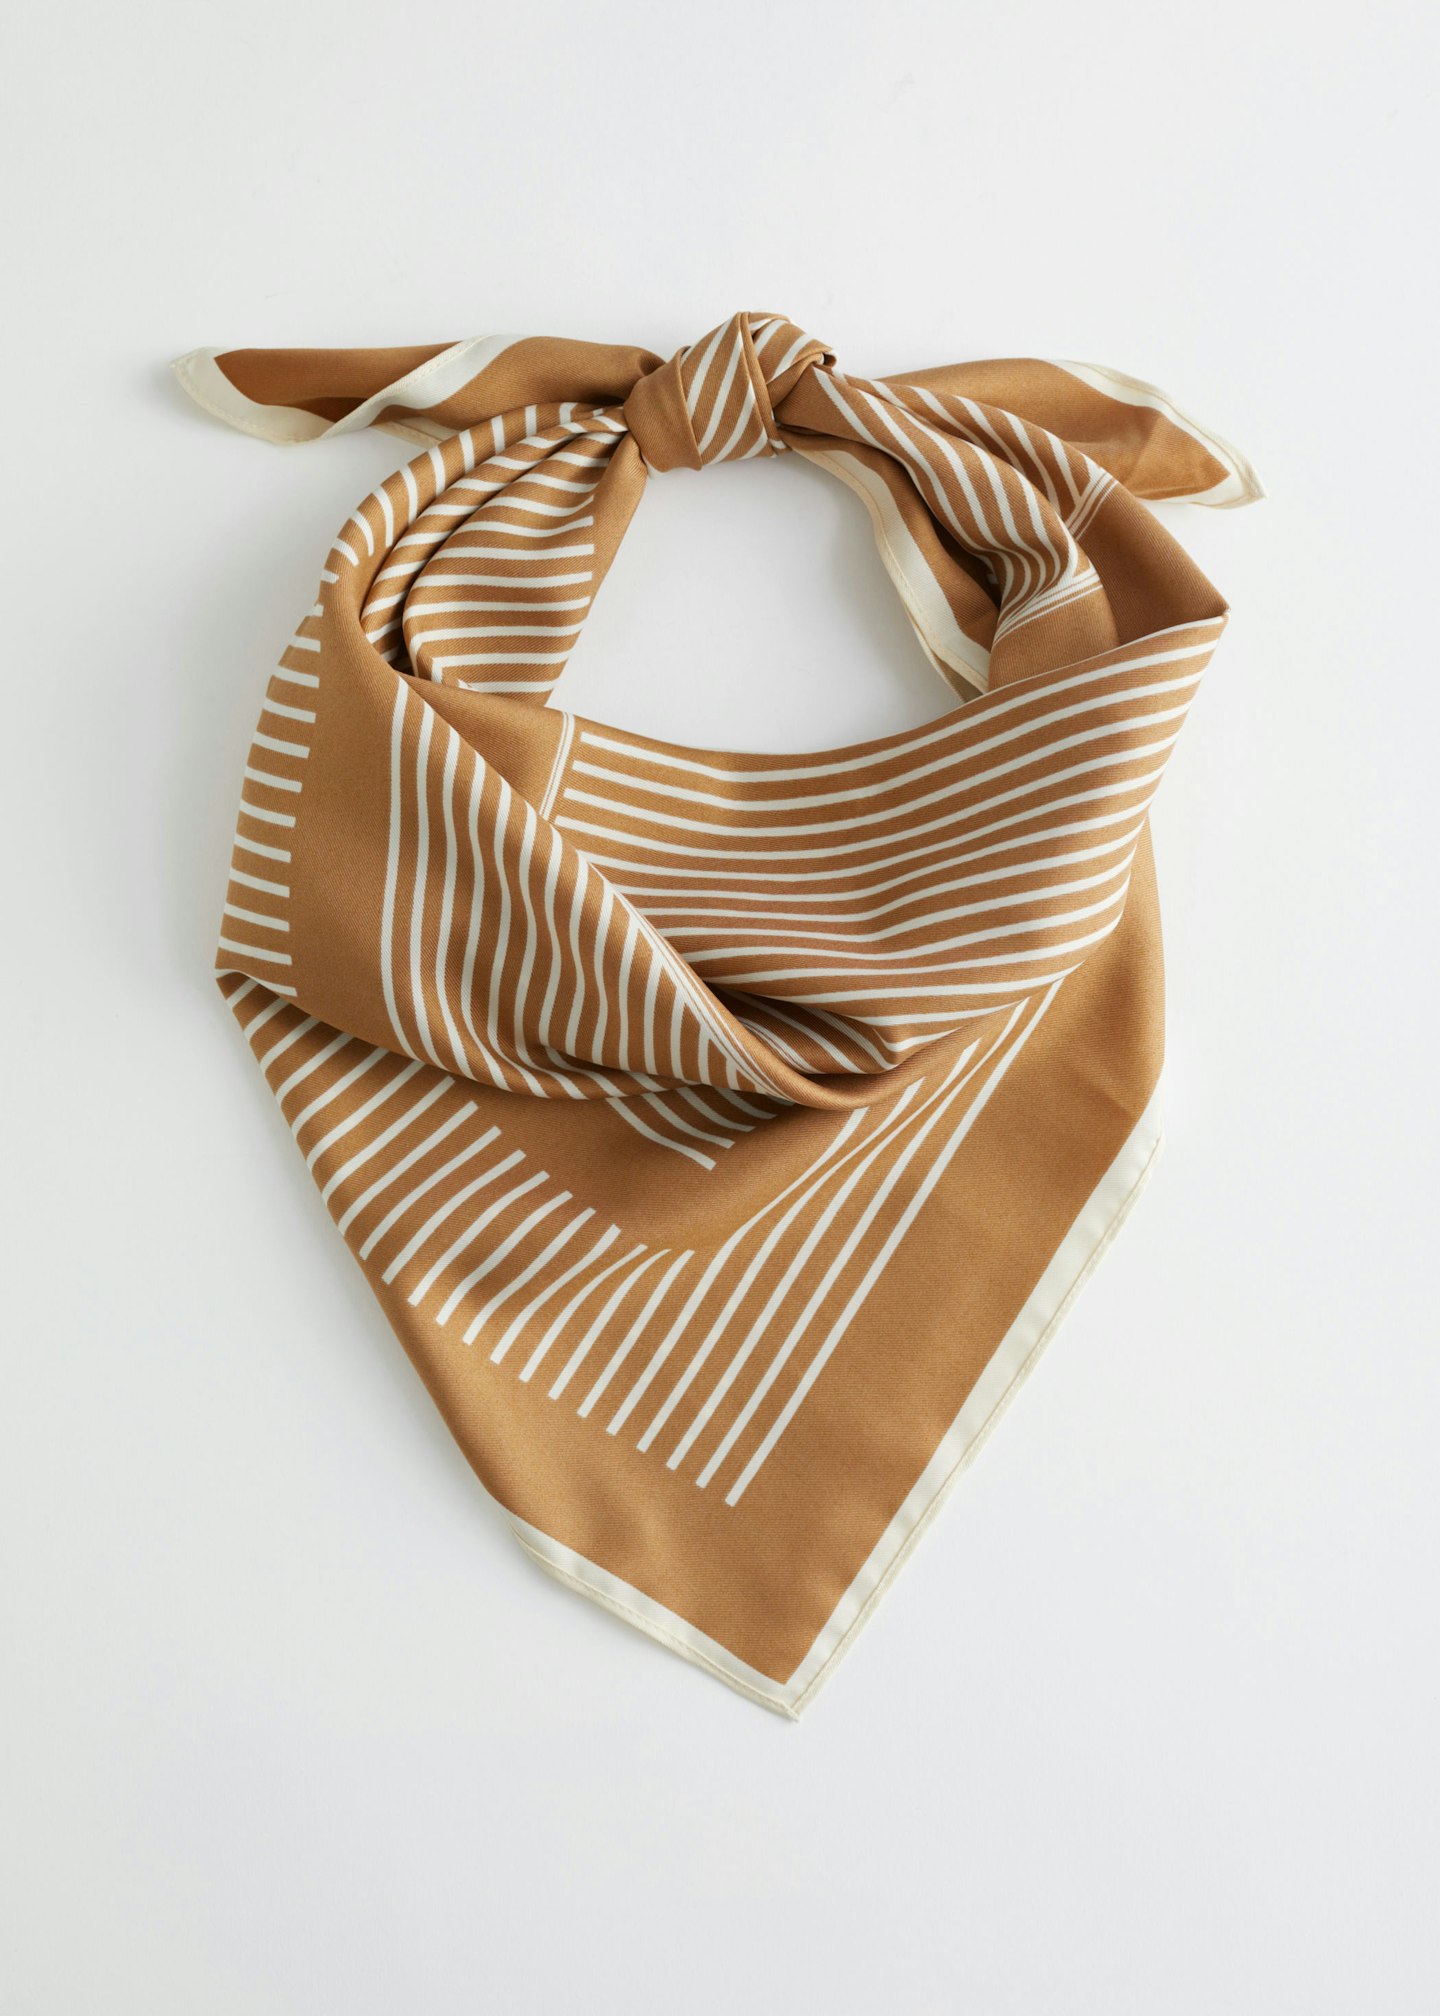 & Other Stories, Striped Twill Scarf, £29